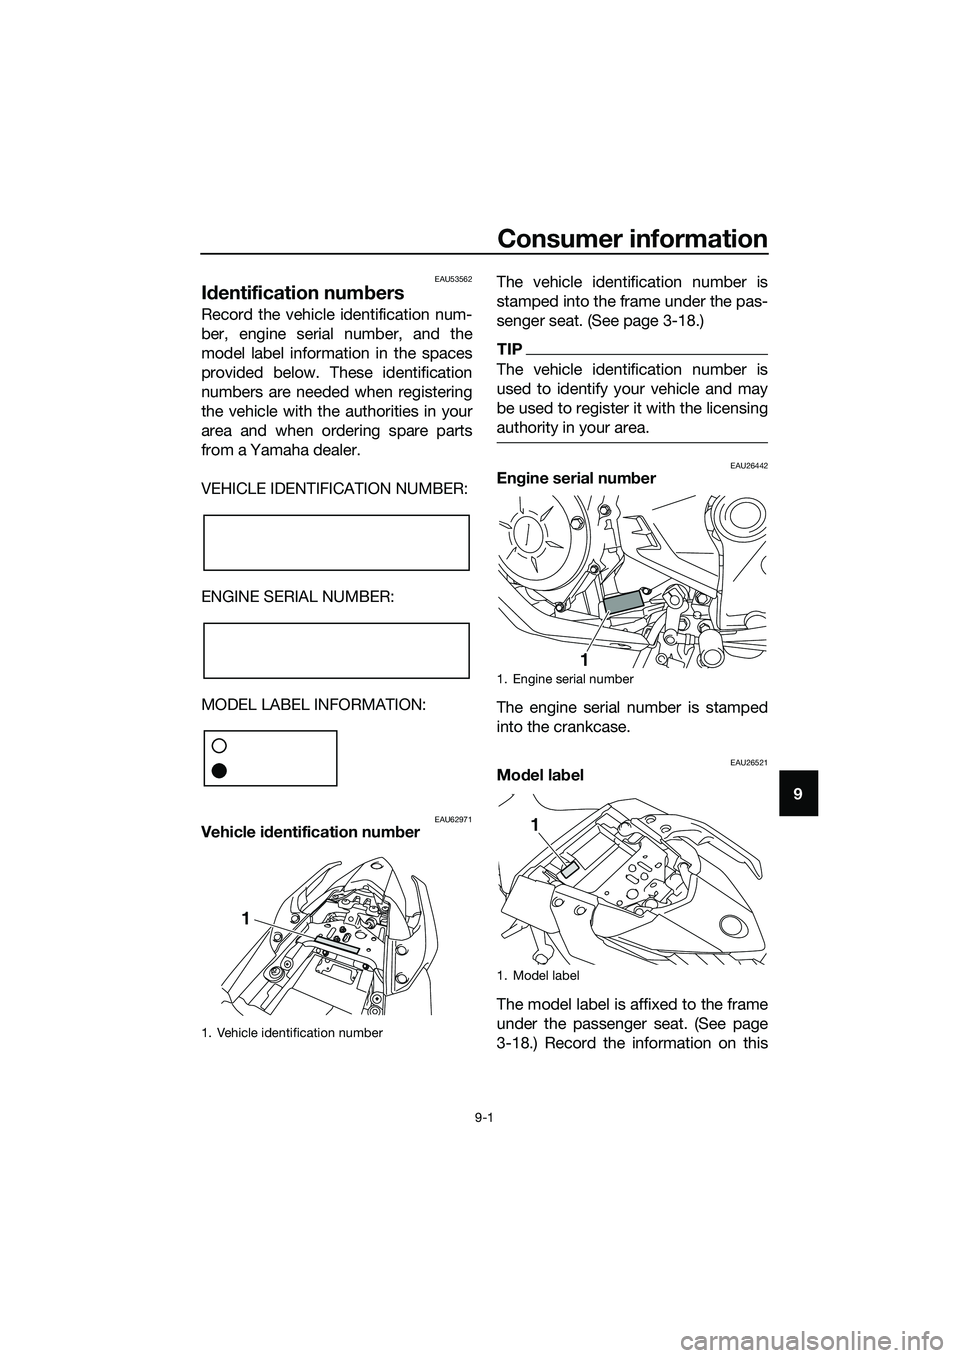 YAMAHA MT-03 2018  Owners Manual Consumer information
9-1
9
EAU53562
Id entification num bers
Record the vehicle identification num-
ber, engine serial number, and the
model label information in the spaces
provided below. These ident